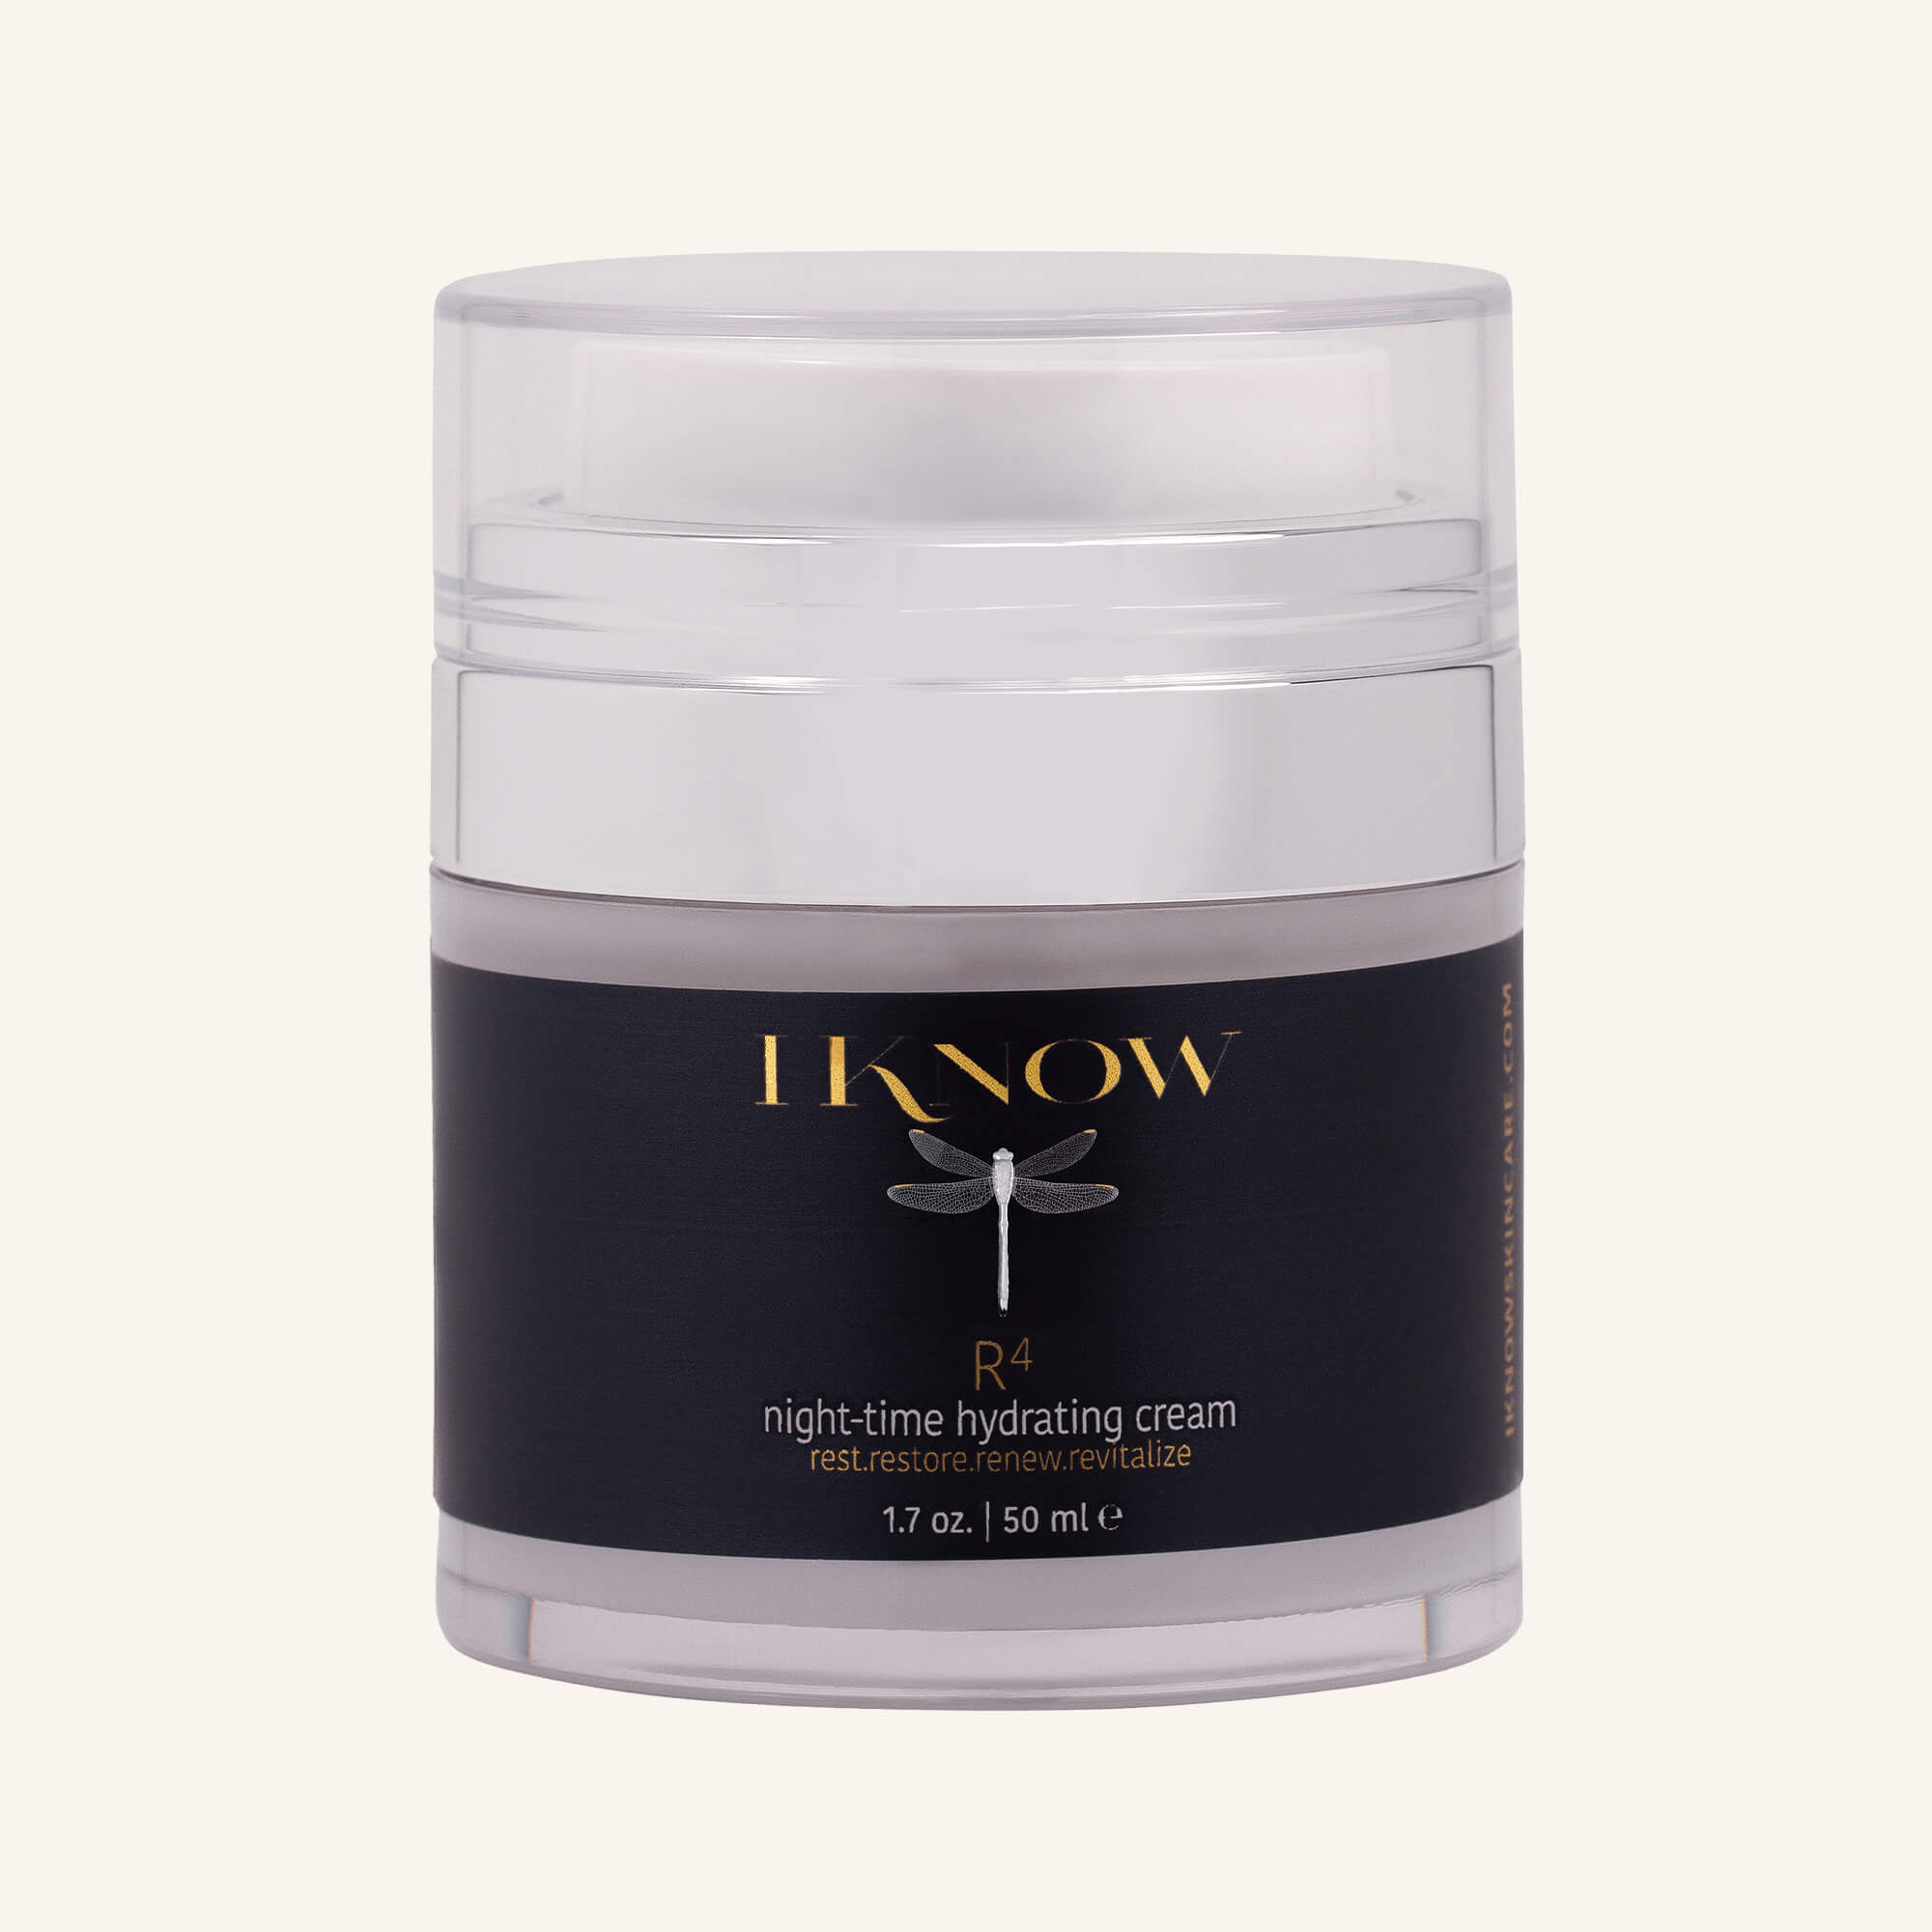 IKNOW R4 Night-time Hydrating Cream replenishes dry skin and boosts suppleness